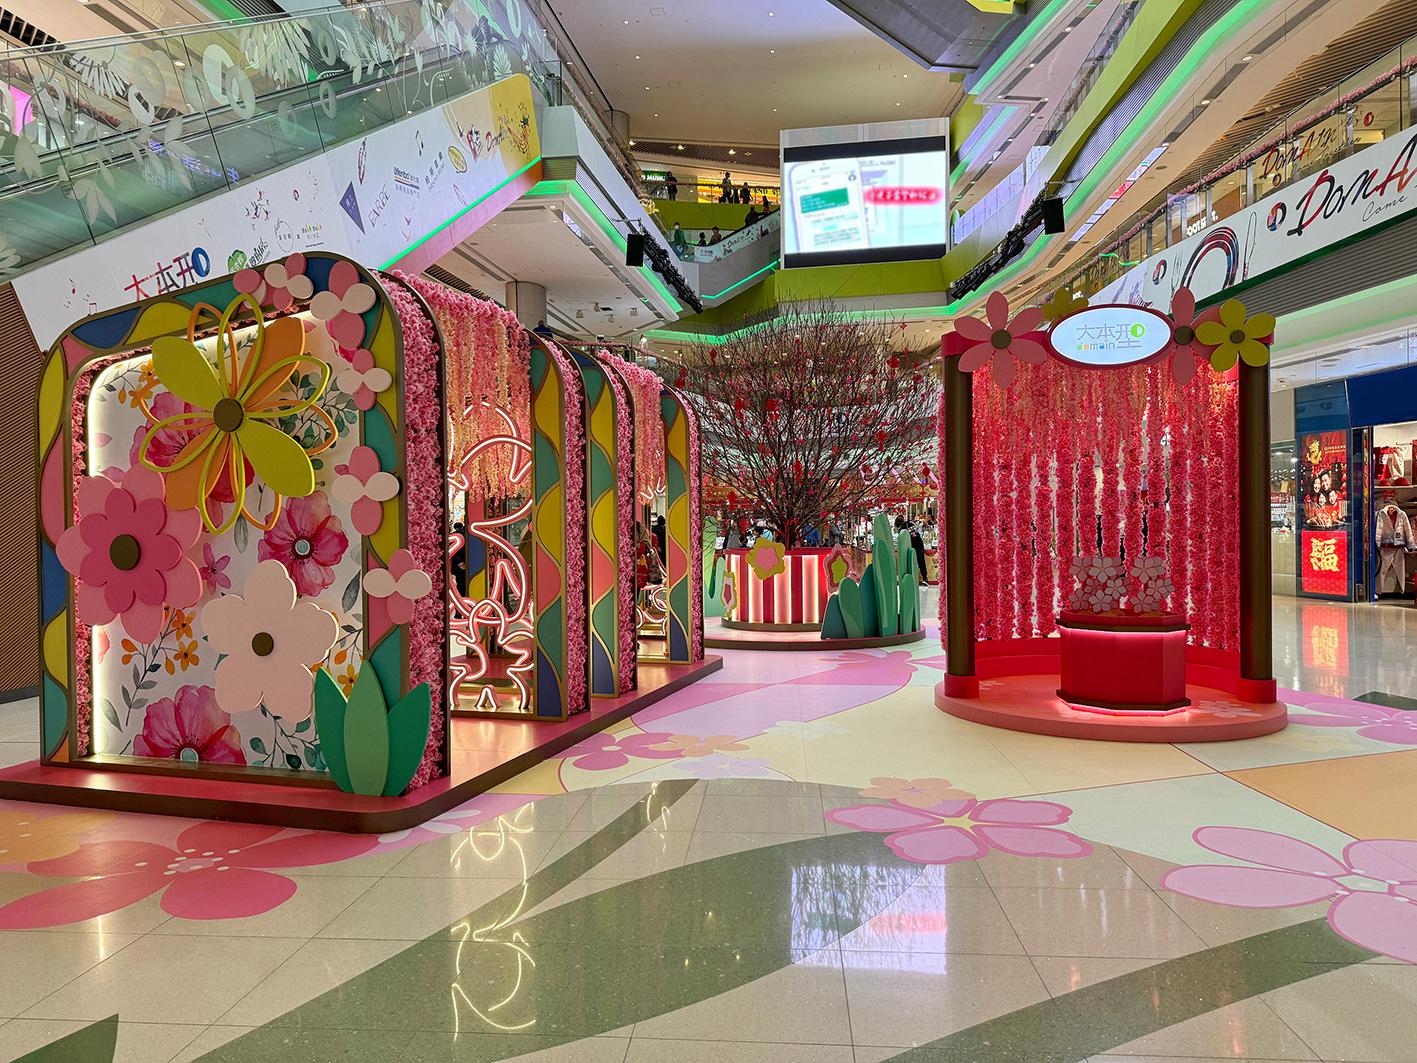 To welcome the Year of the Dragon, the Hong Kong Housing Authority has arranged celebratory events for shoppers to celebrate the new year and help boost the economy. Photo shows the festive decorations under the theme of "Blossoming Love" at the ground floor atrium of the regional shopping centre, Domain, in Yau Tong.